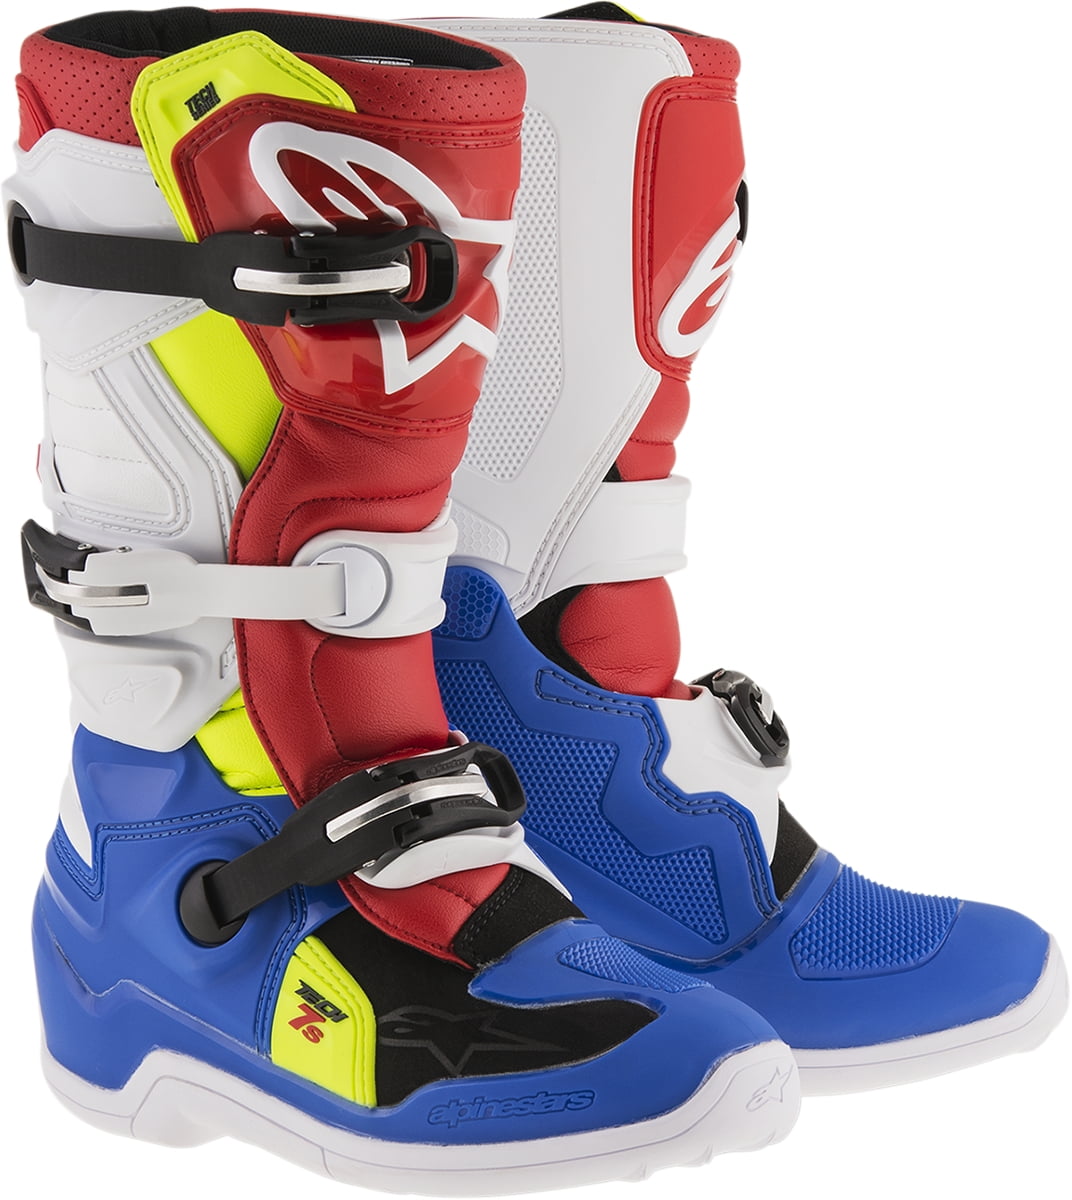 Blue/White/Red/Yellow, Size 4 2015017-7025-4 Alpinestars Unisex-Child Tech 7S Youth Boots